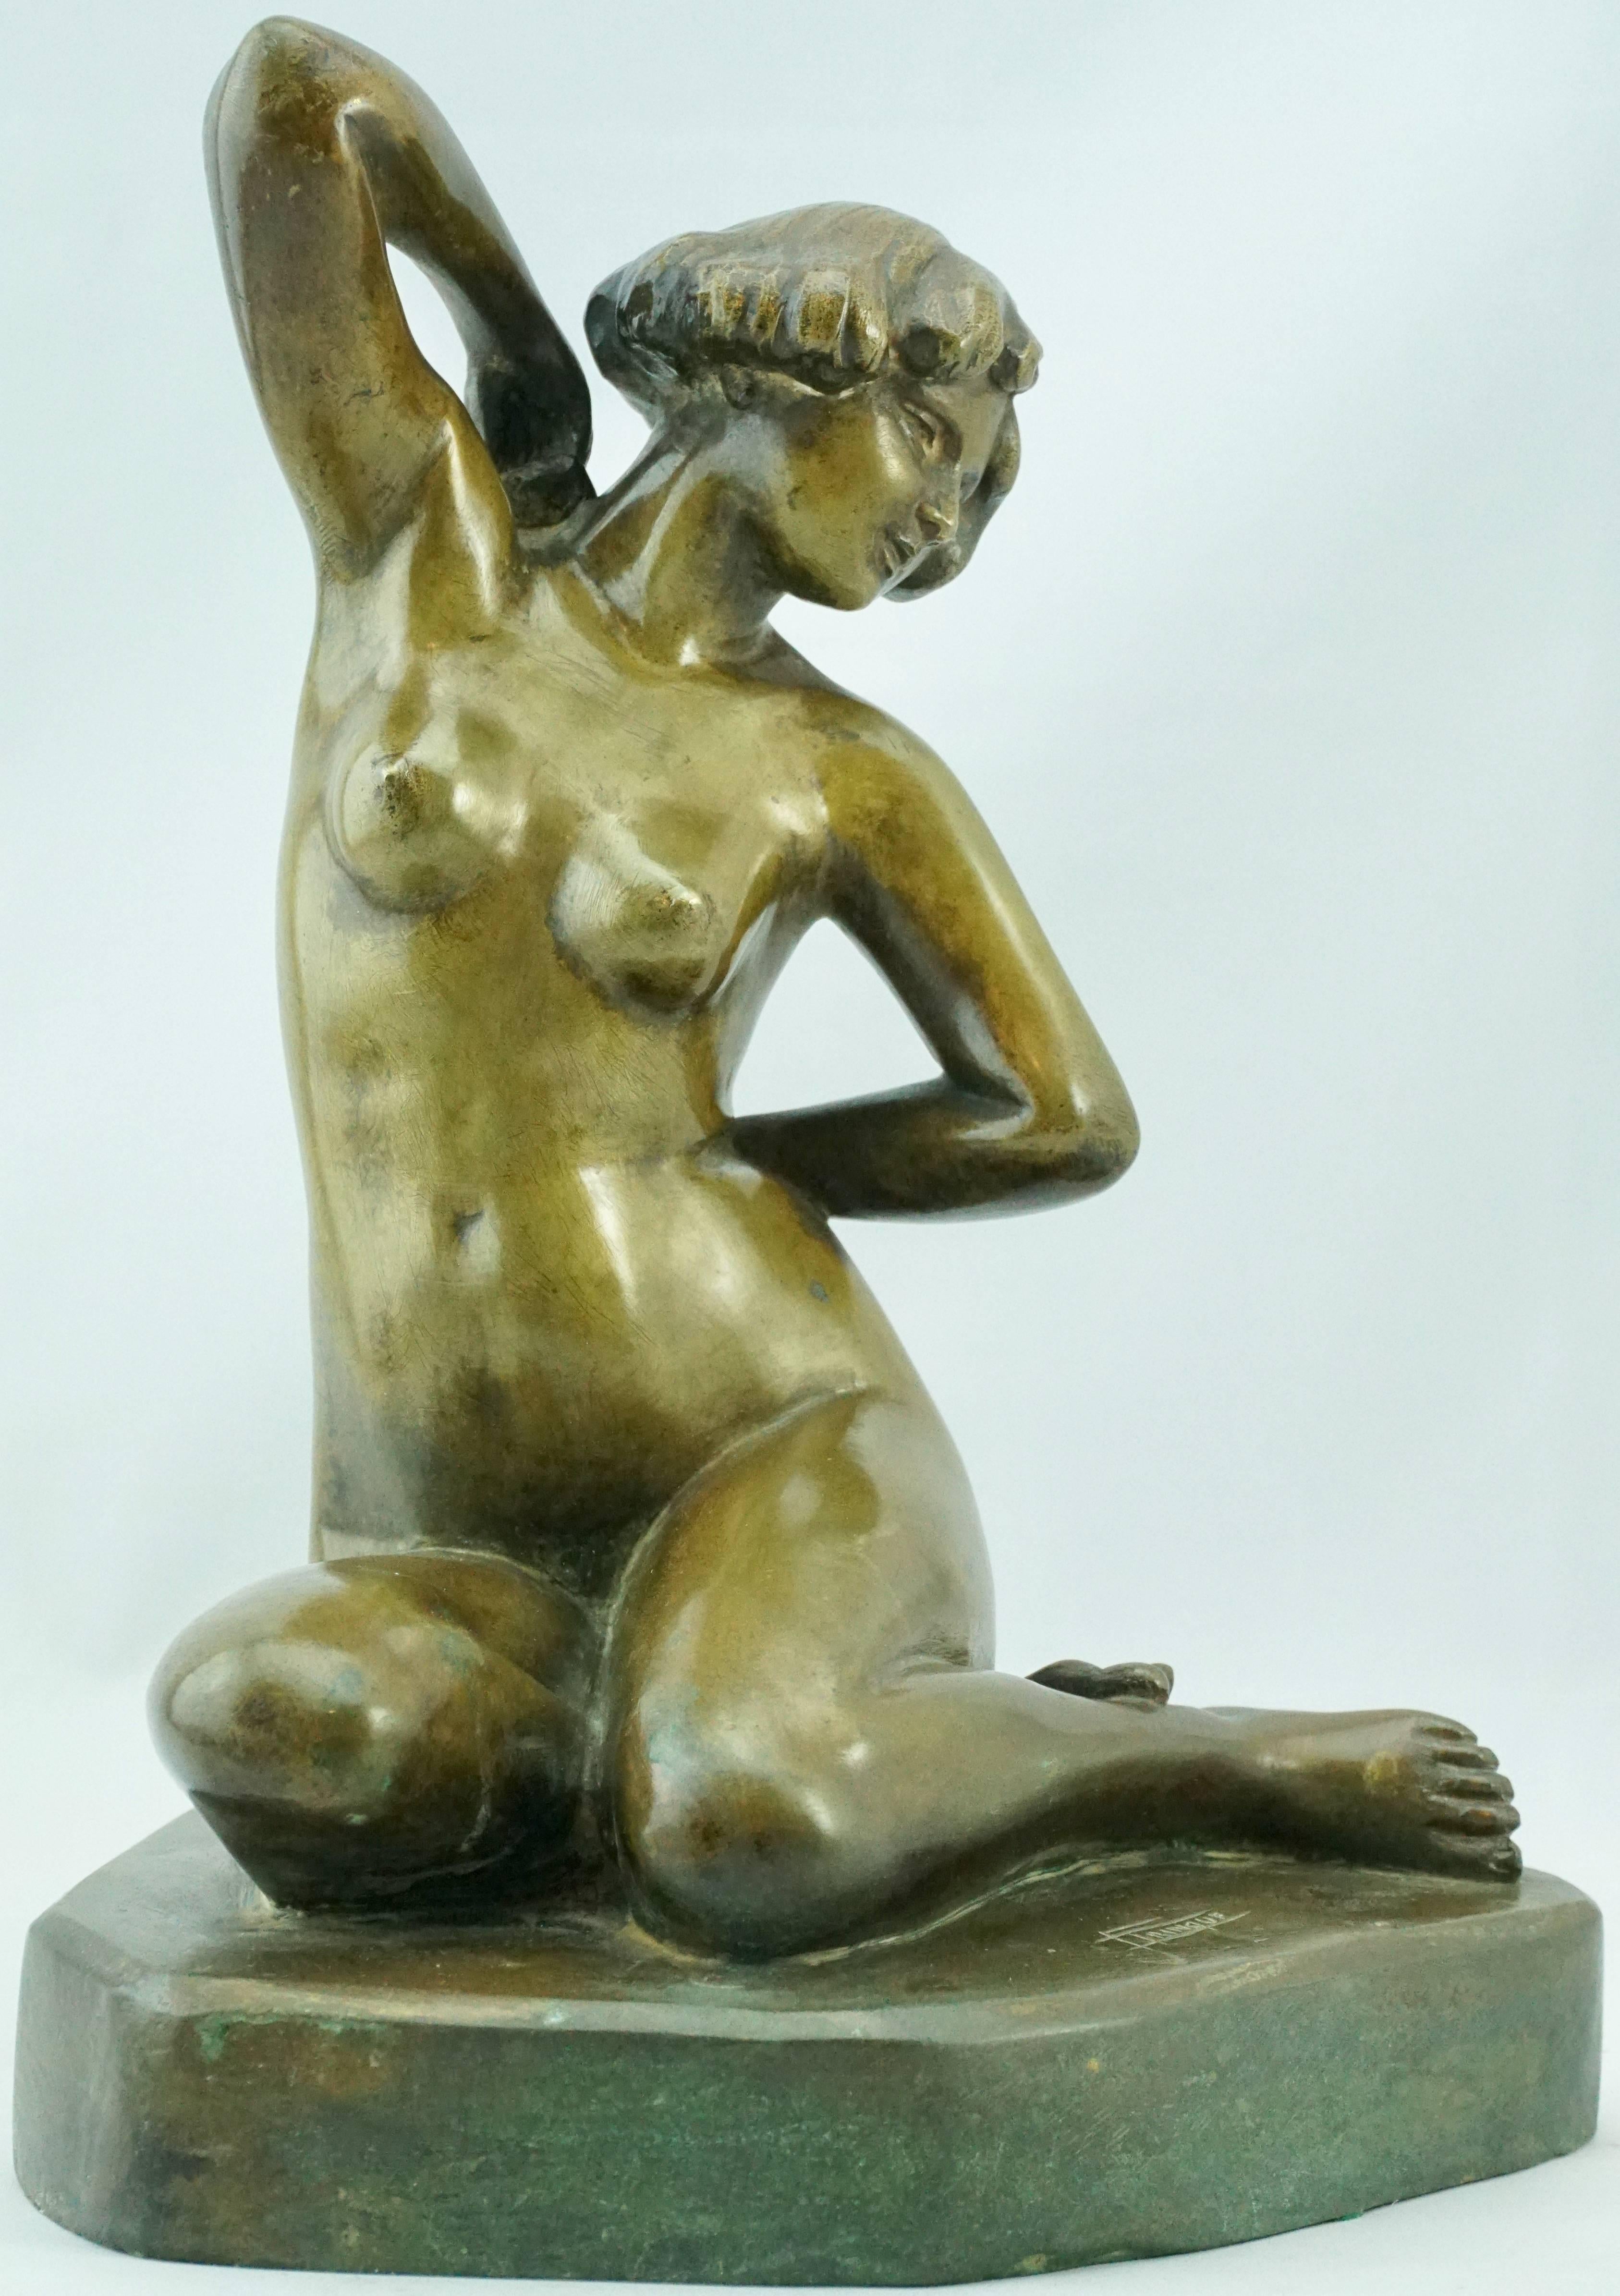 French Art Deco bronze sitting nude by F. Trinque, 1930. A gorgeous Art Deco woman stretching her arms and drying her back with a towel possibly after a swim or bath with a rich golden brown patina. 

Measures: Height 9 inches (22.9 cm).

Inscribed